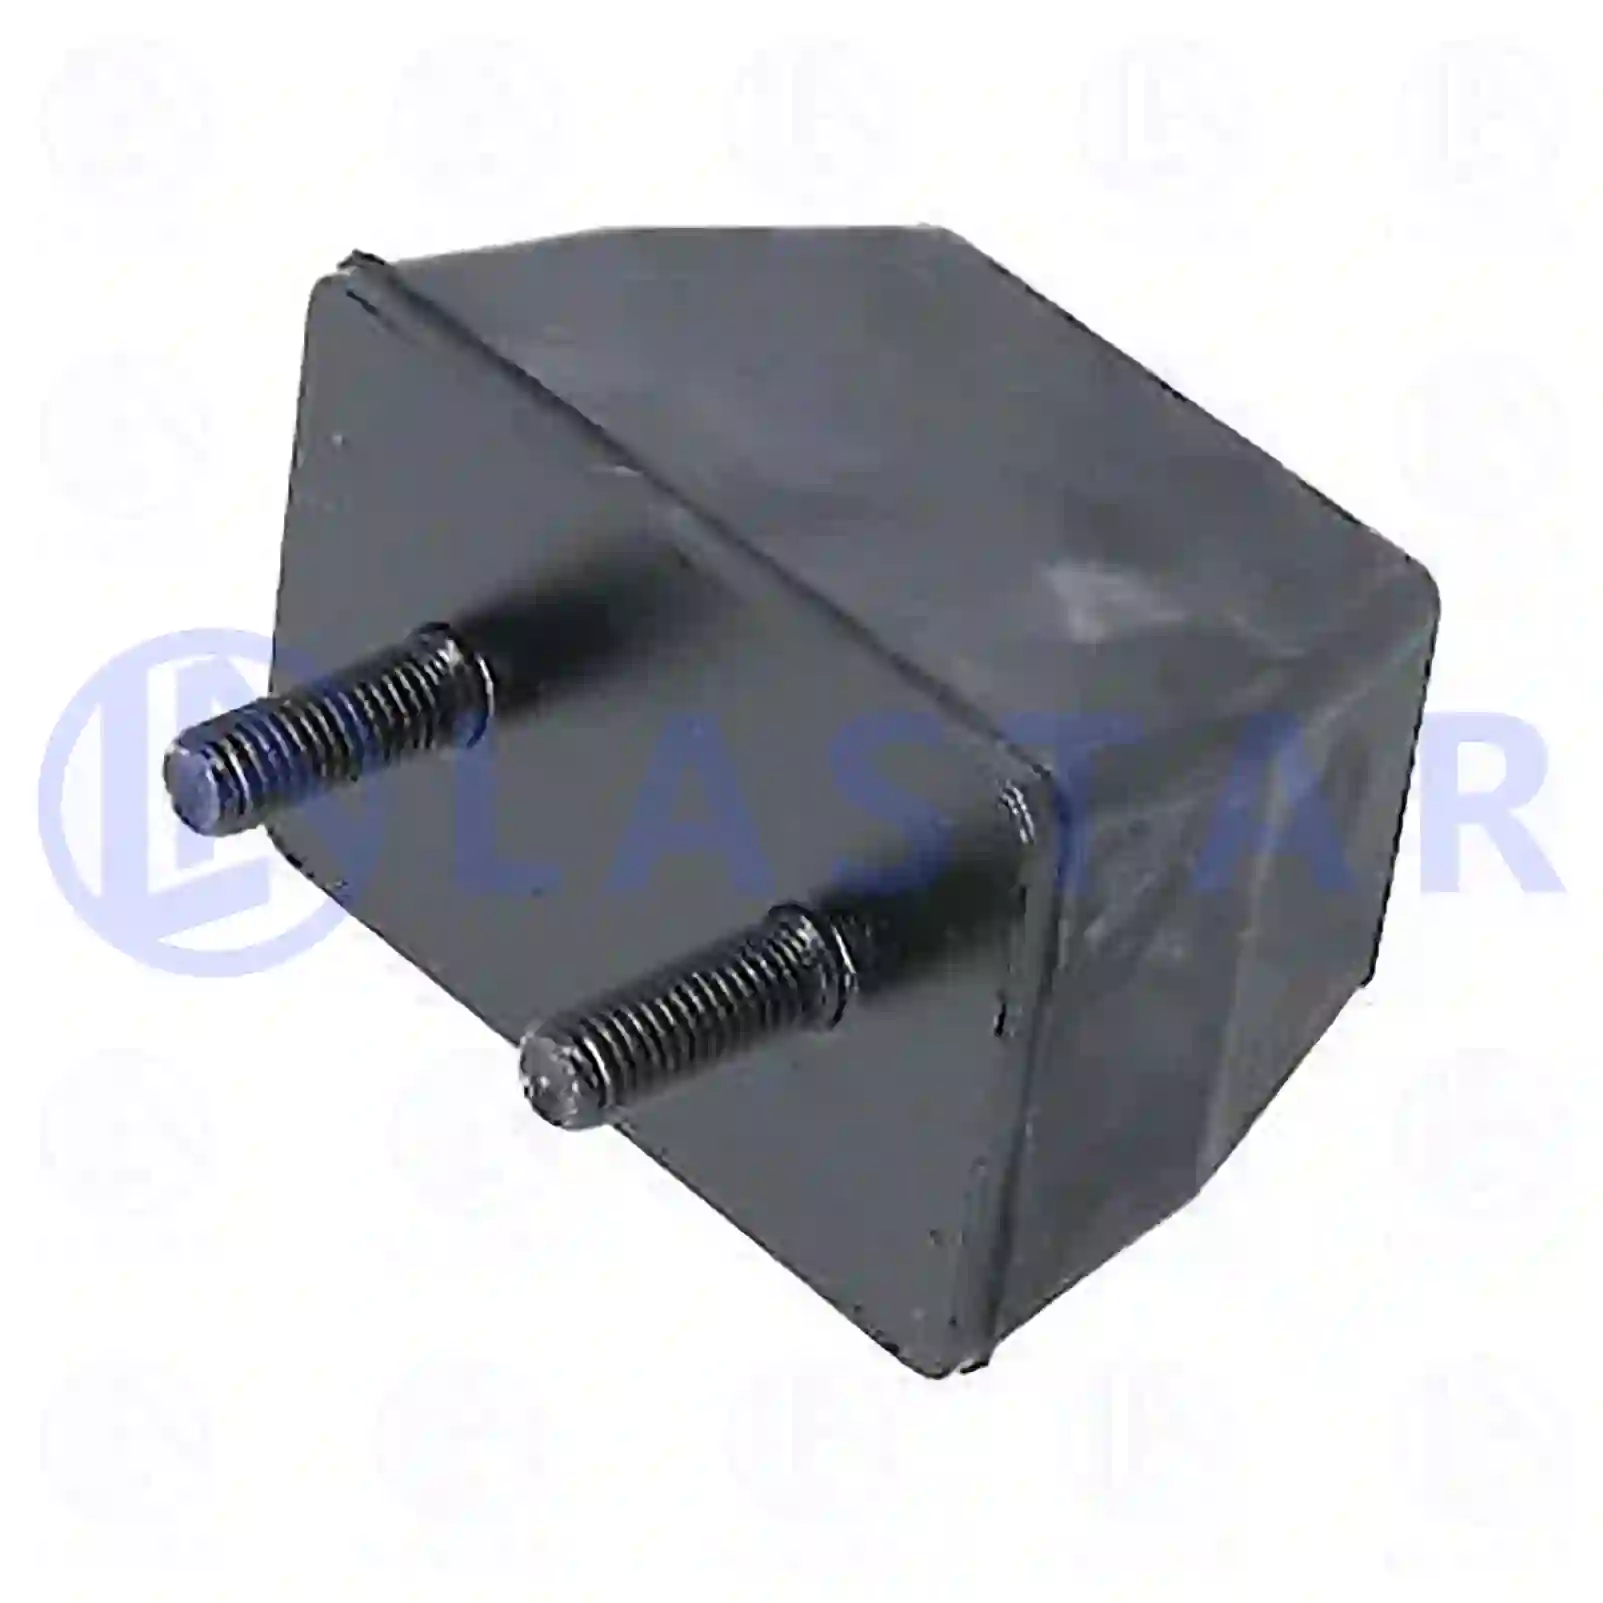 Buffer stop, 77727550, 0388486, 388486, ZG40880-0008 ||  77727550 Lastar Spare Part | Truck Spare Parts, Auotomotive Spare Parts Buffer stop, 77727550, 0388486, 388486, ZG40880-0008 ||  77727550 Lastar Spare Part | Truck Spare Parts, Auotomotive Spare Parts